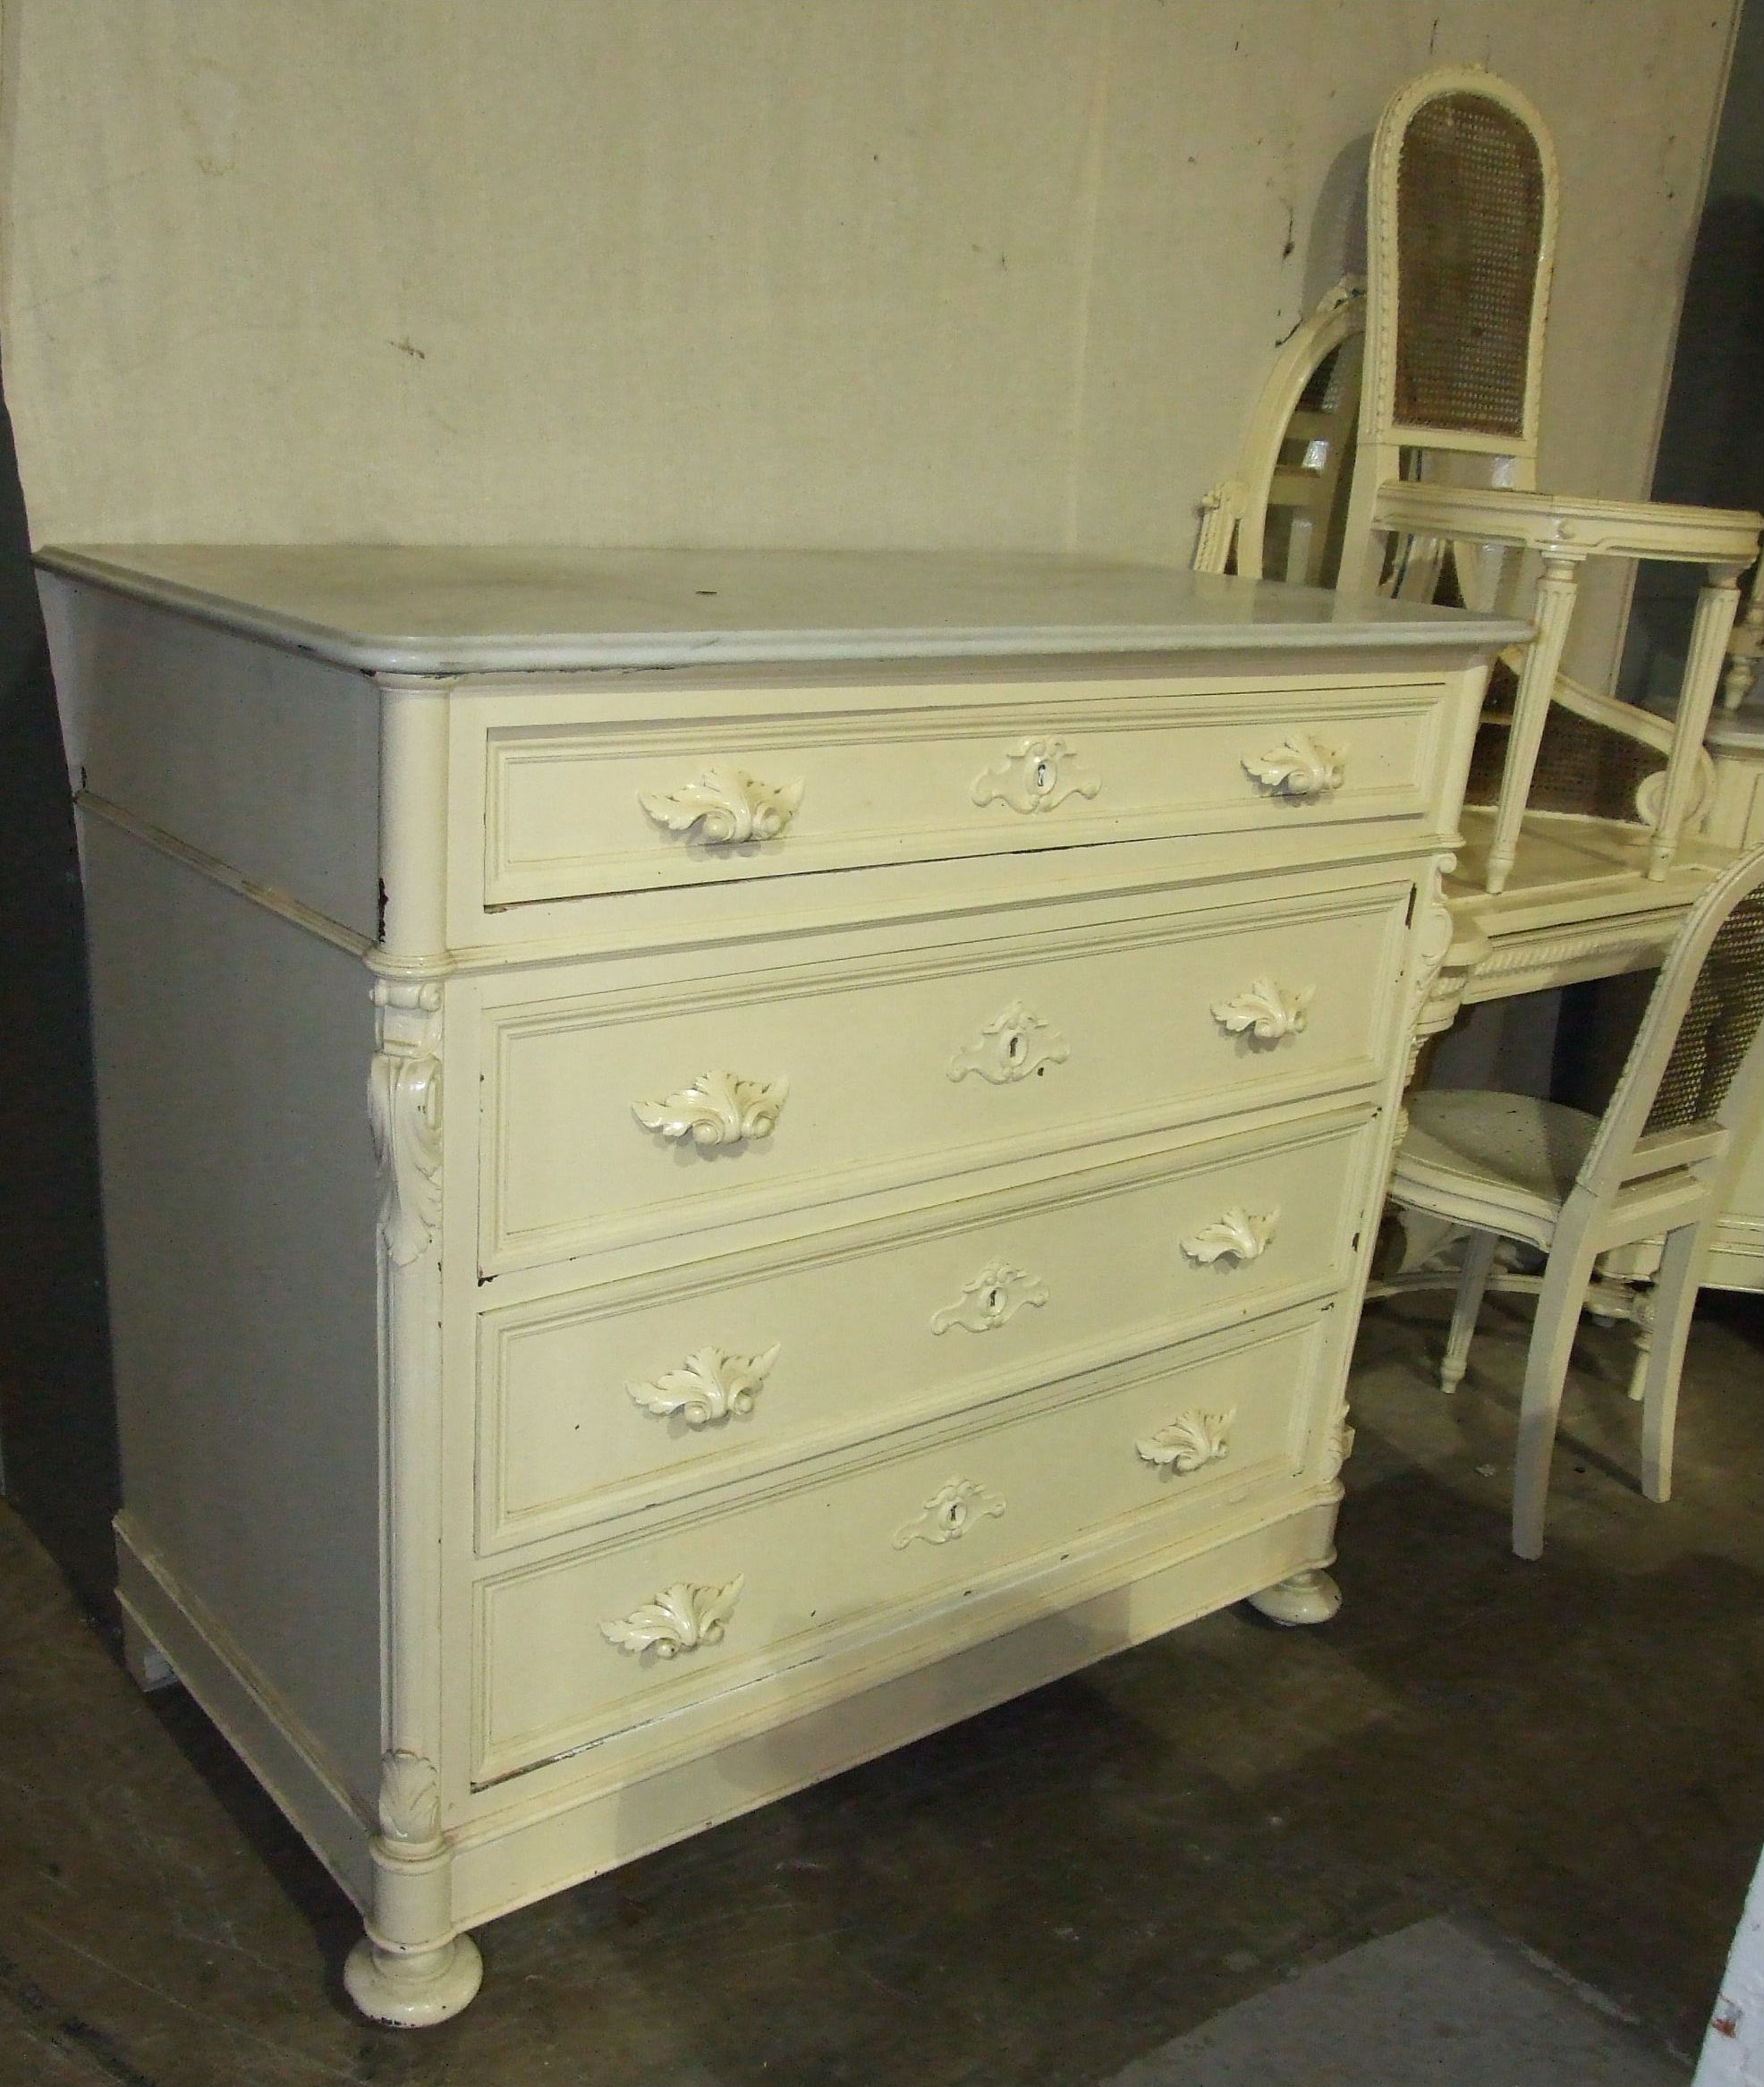 A 19th century Continental painted wood dressing table with double caned panels, drawer and - Image 2 of 3